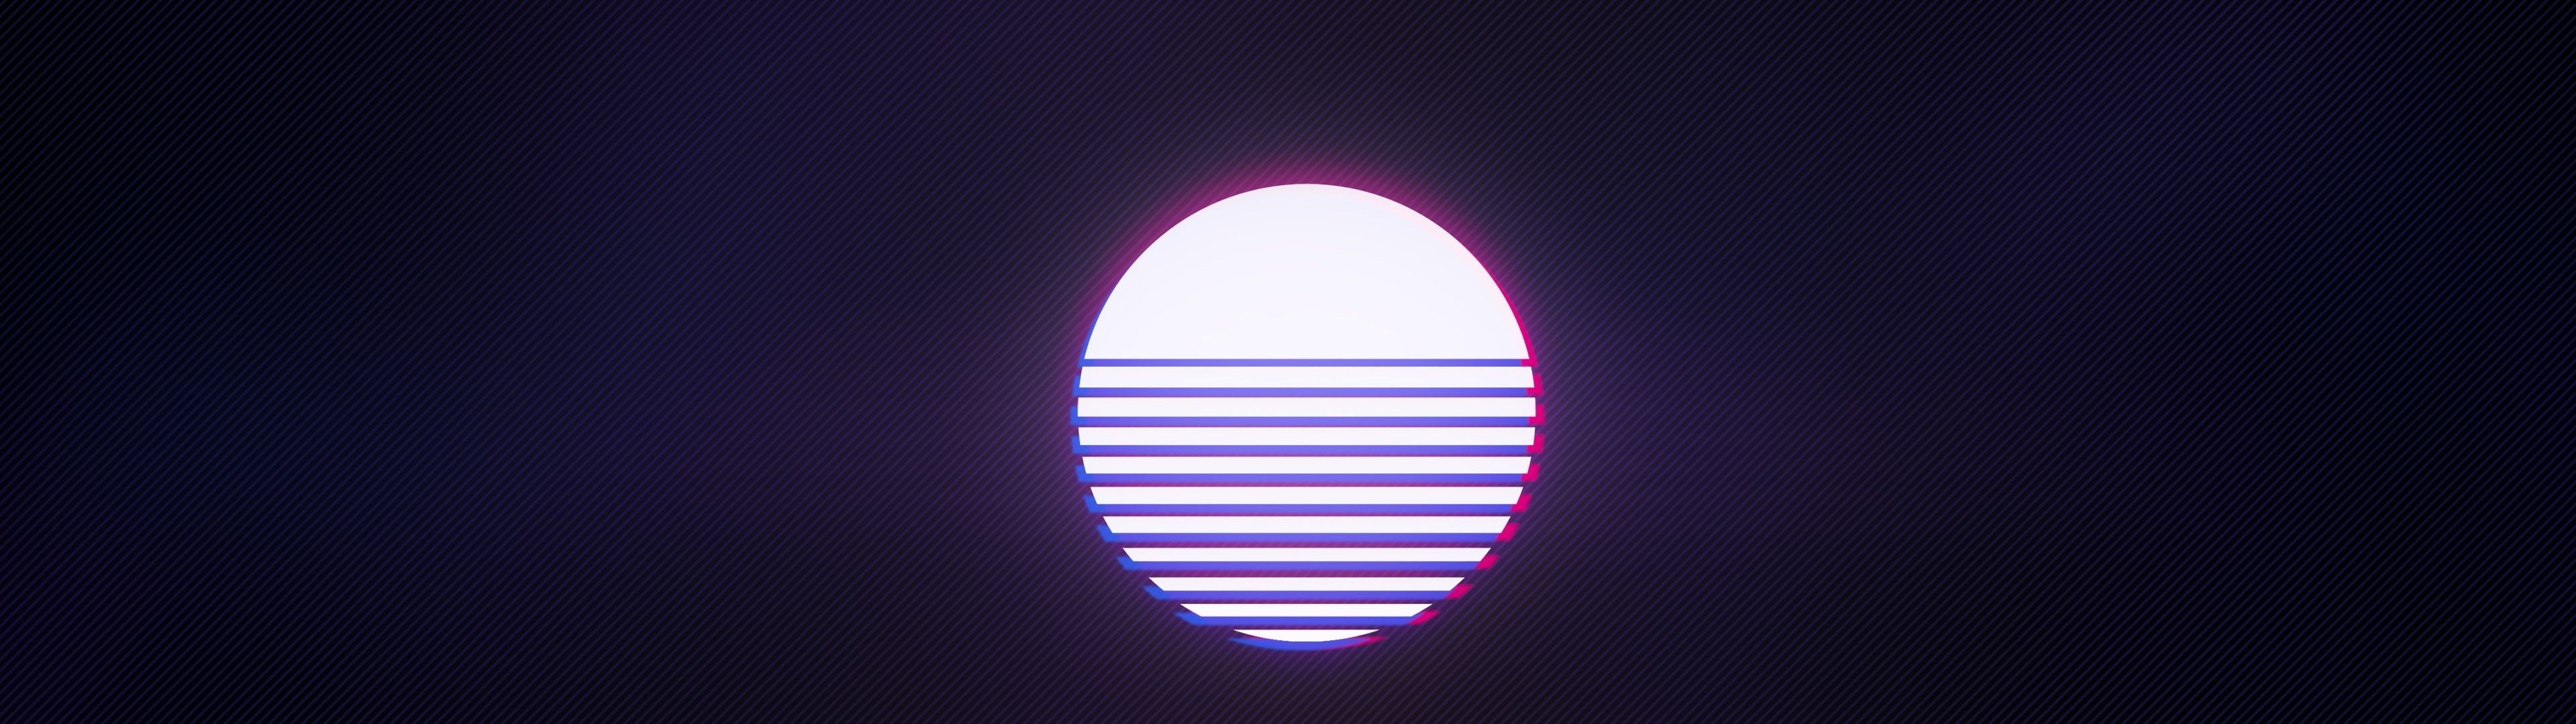 Download 3840x1080 Sun, Retro Wave, Synthwave, Music Wallpaper